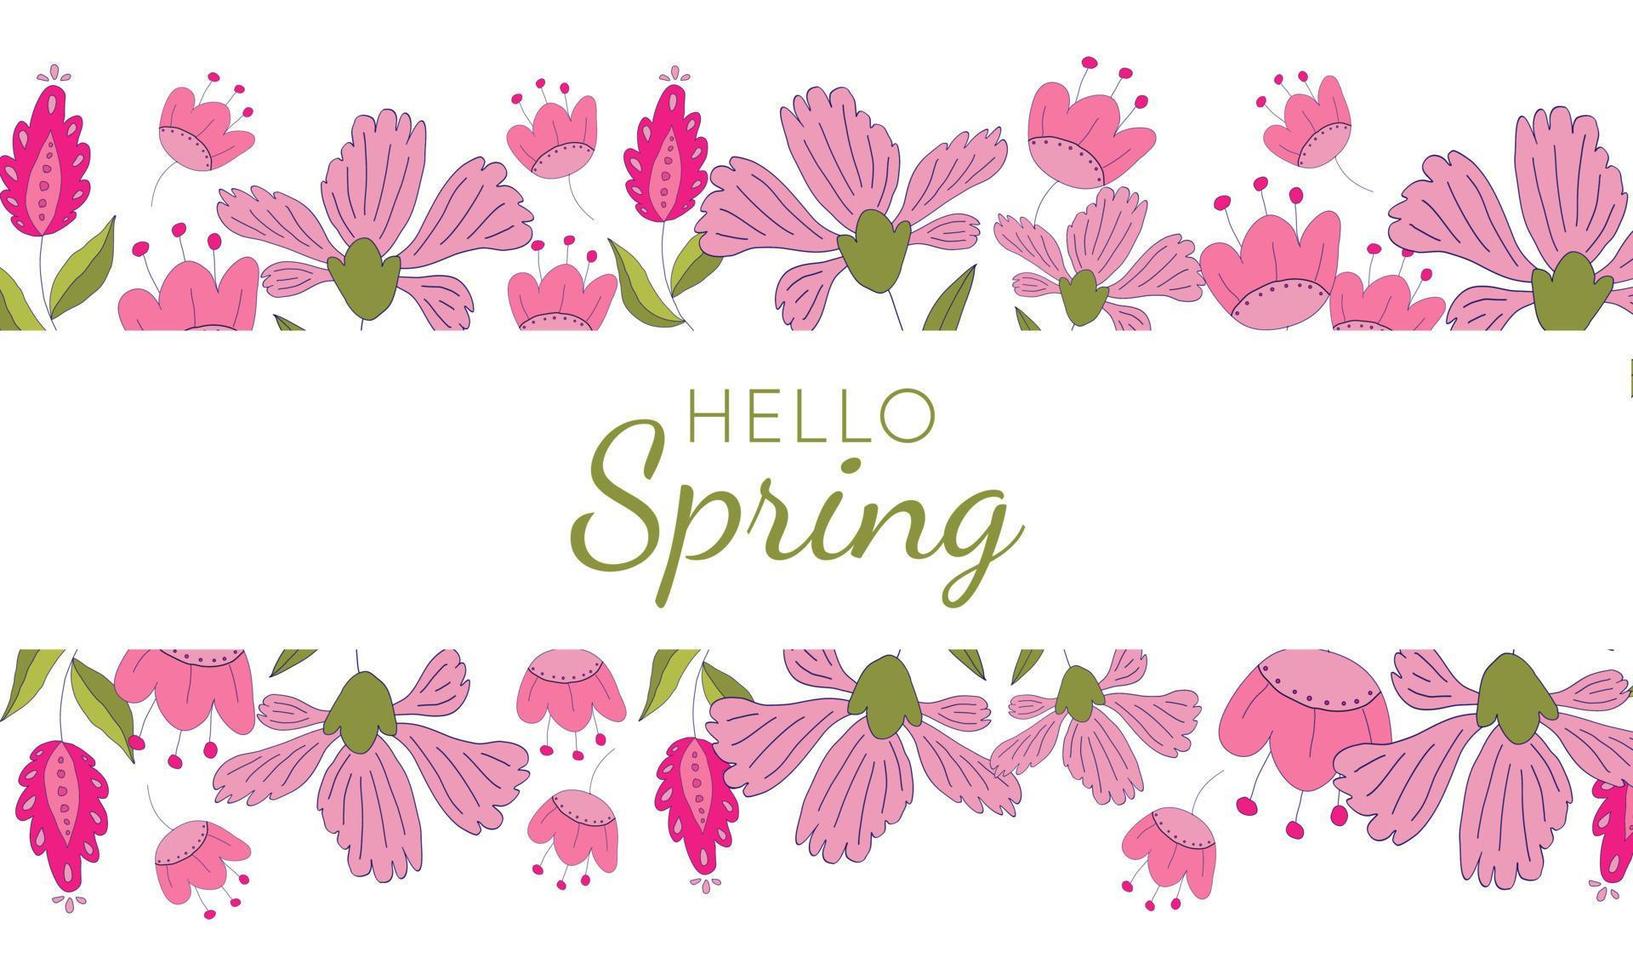 Hello Spring season background with pink flowers for greeting card, invitation template. vector